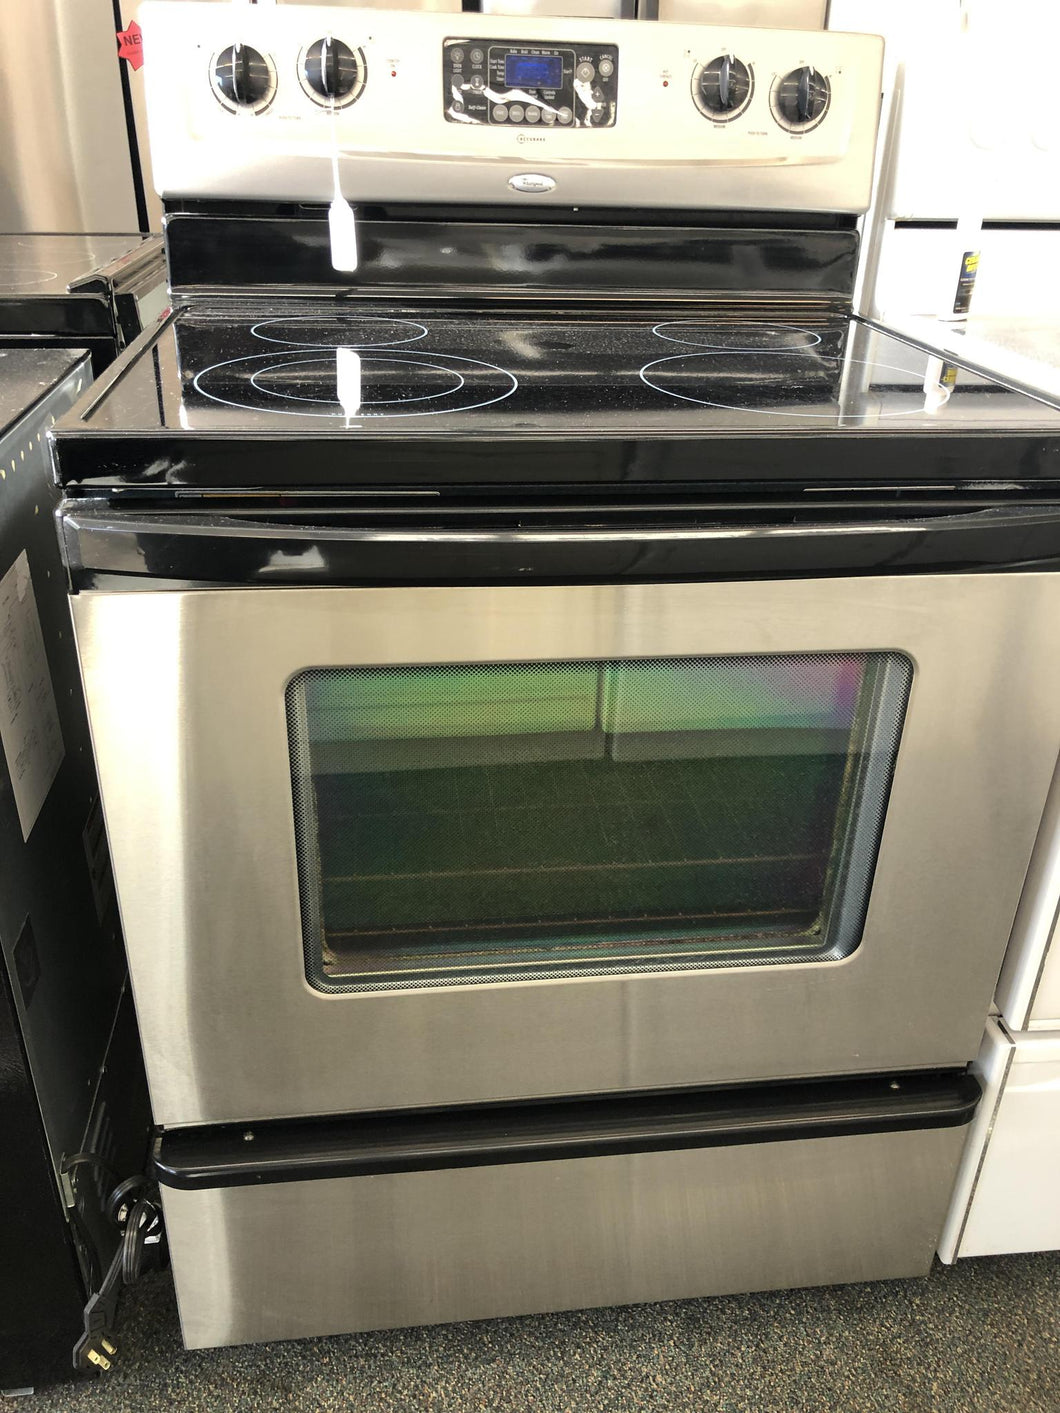 Whirlpool Stainless Electric Stove - 3591